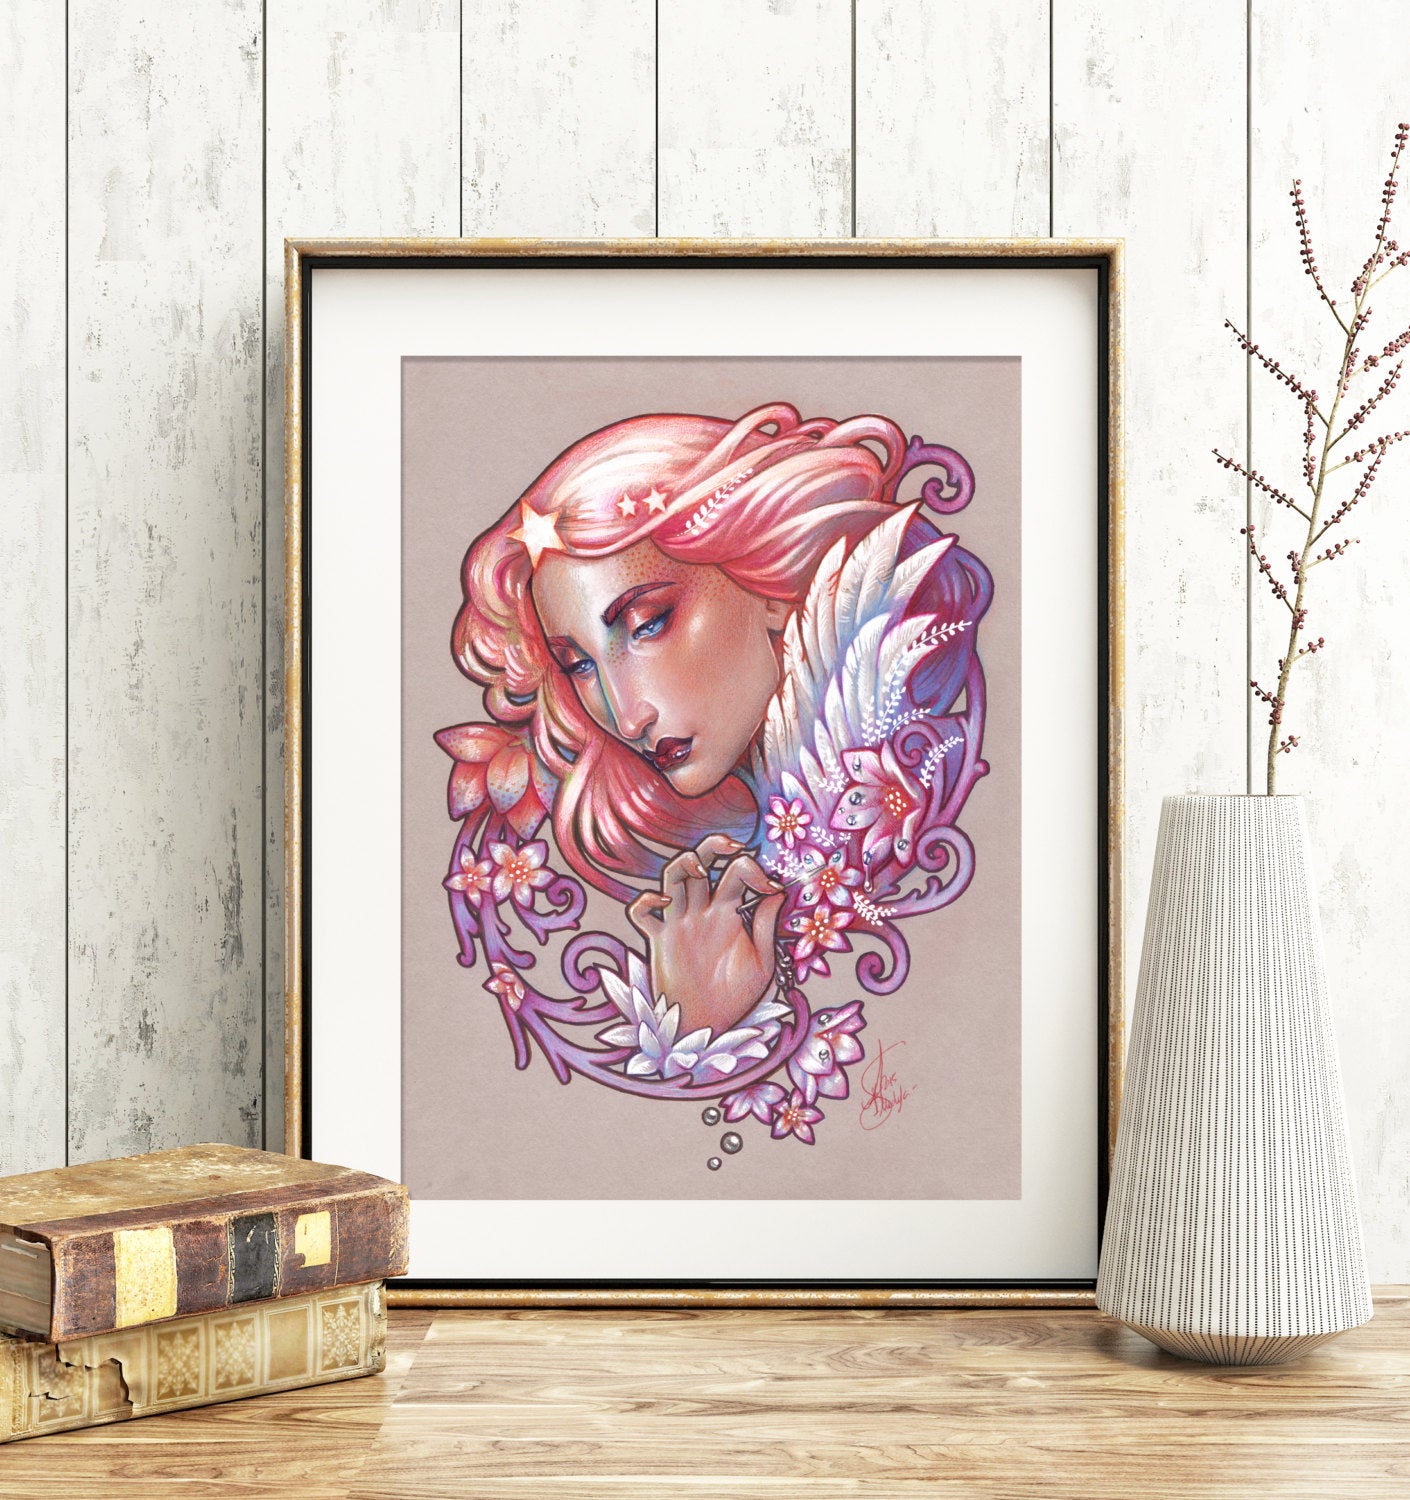 morning star medusa dollmaker red hair stars and wings woman astronomy morning art pastel colours redhair art nouveau